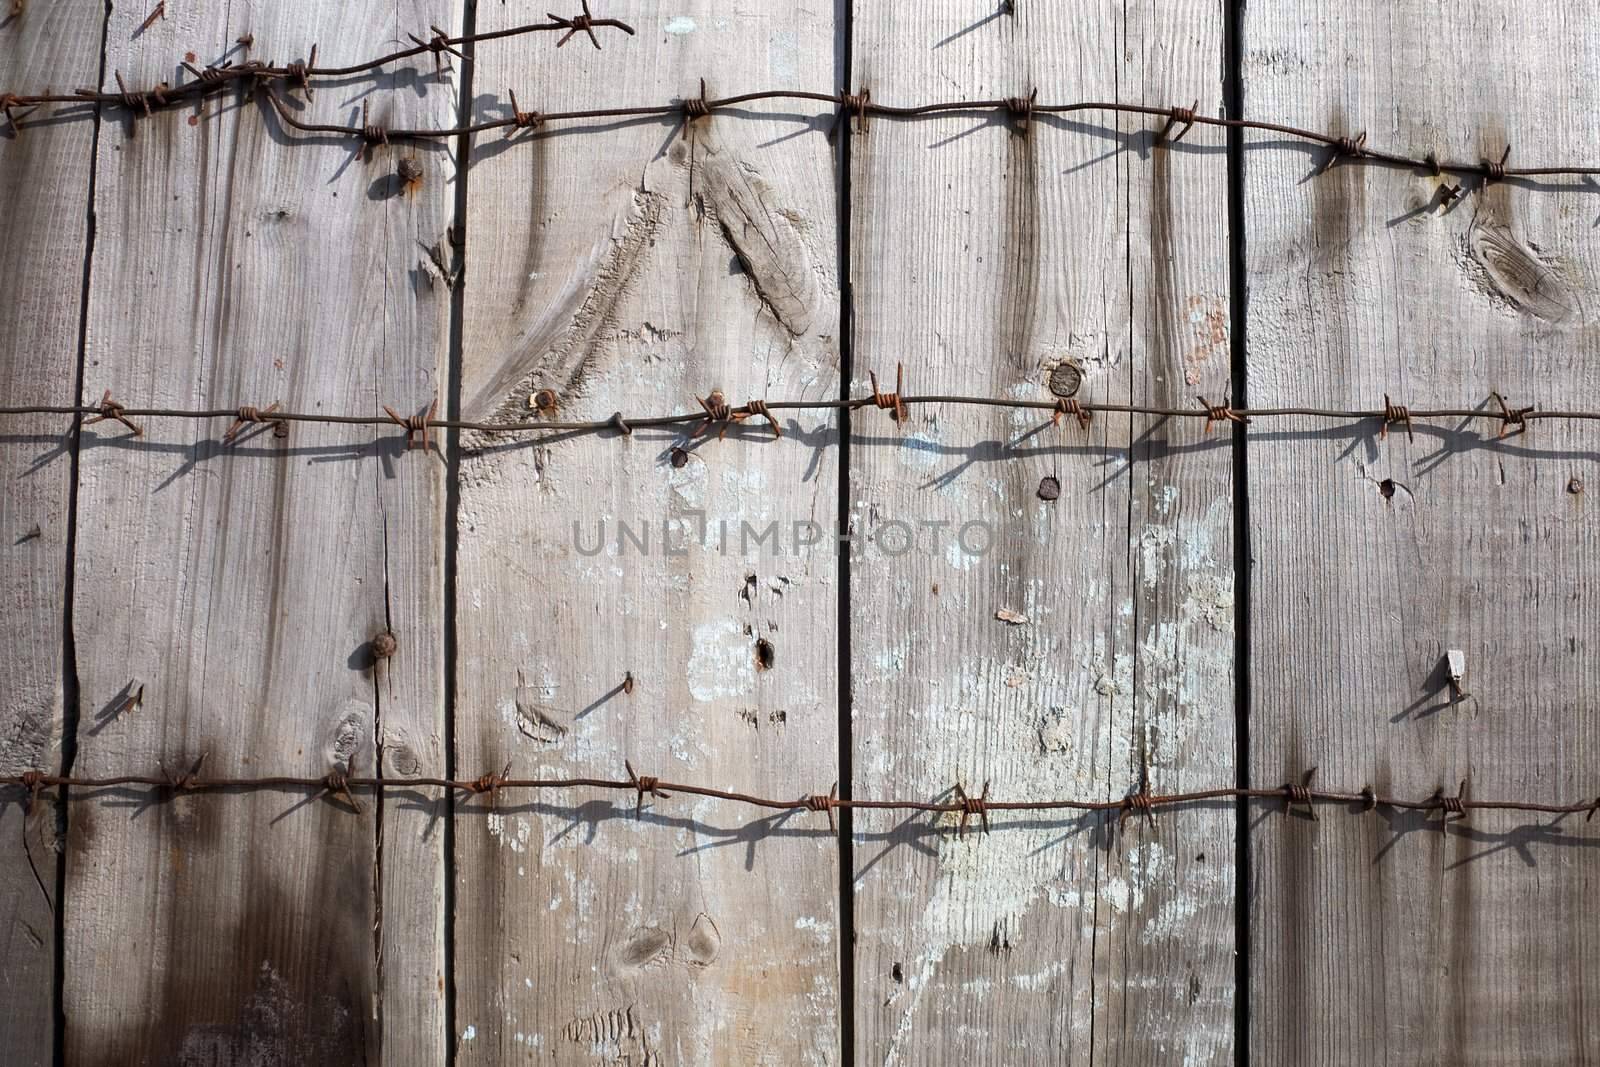 Wooden fence entangled by a barbed wire